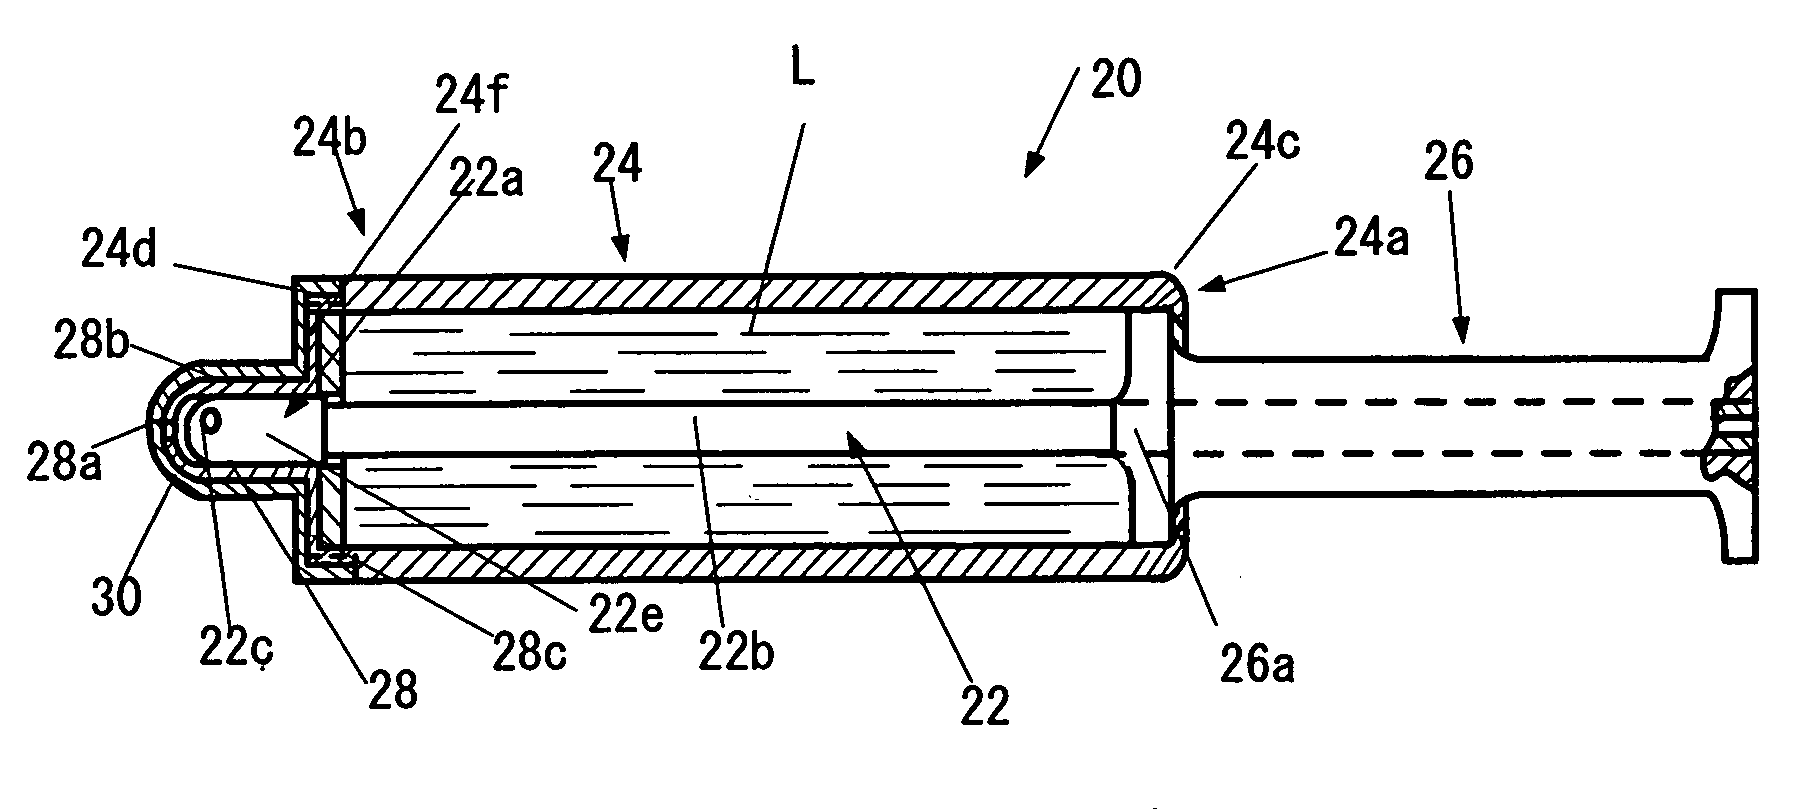 Urethral catheter assembly for combining catheterization with injection of therapeutic liquid into the urethral channel